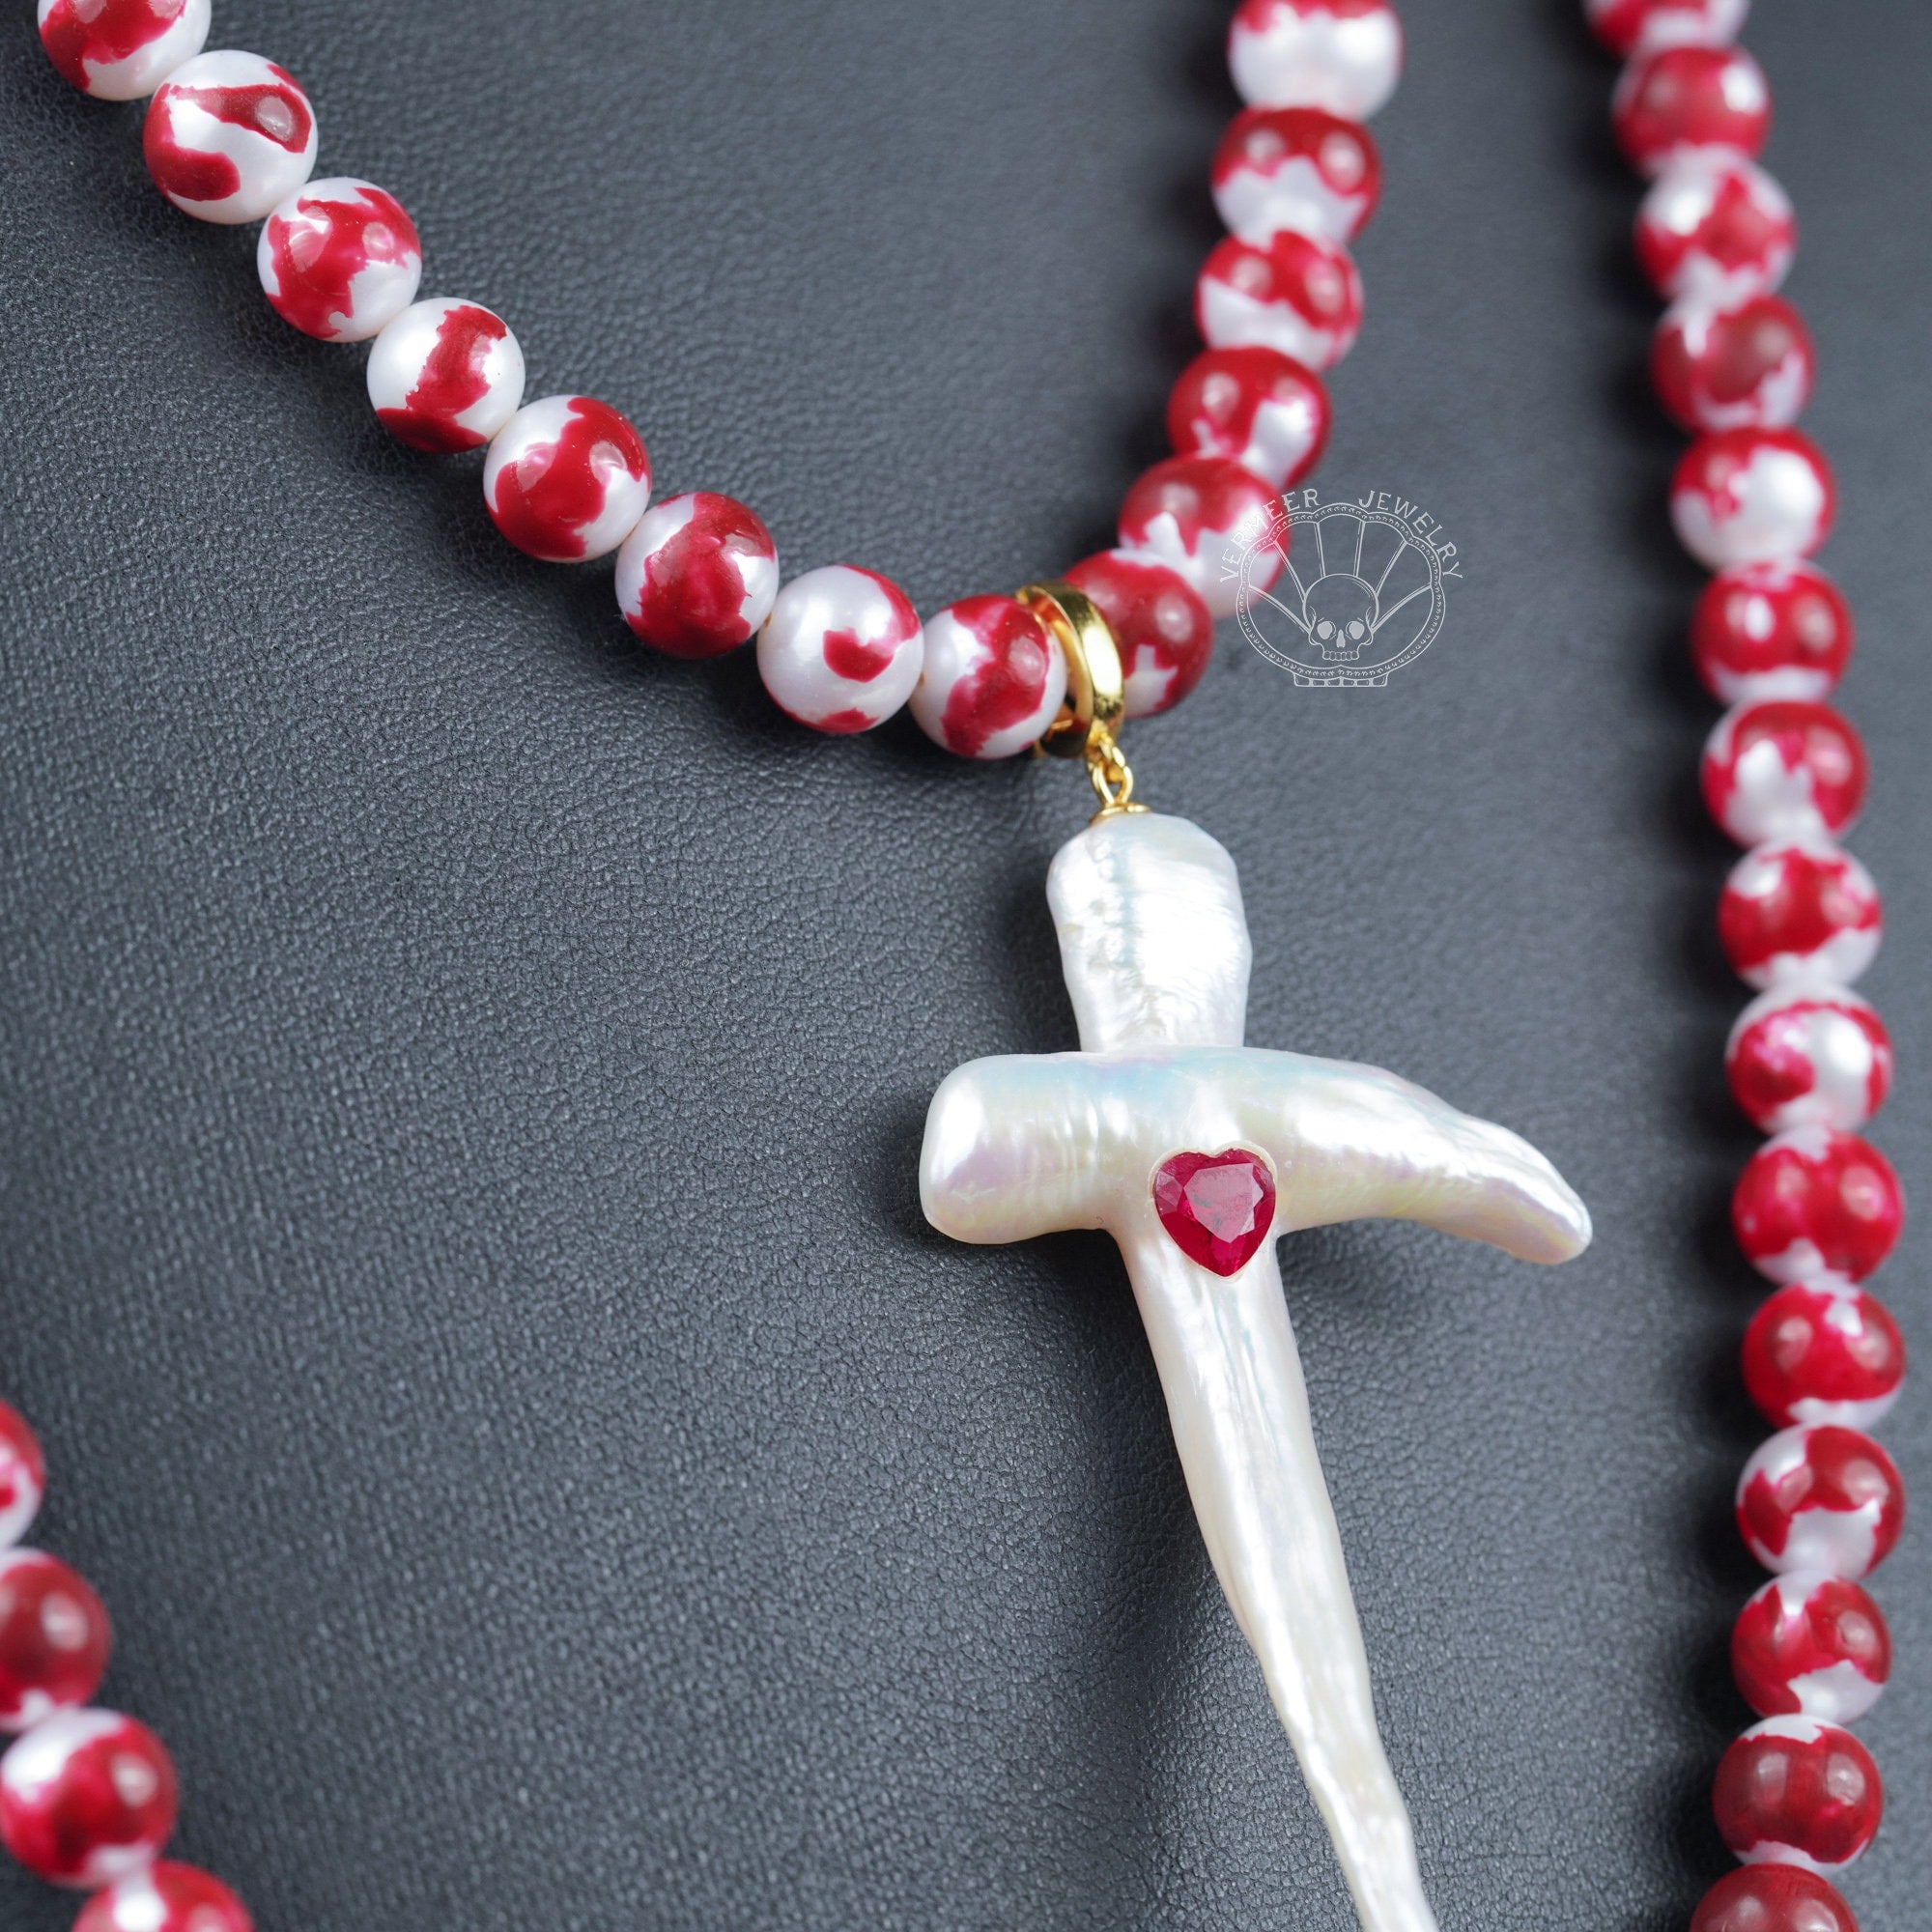 blood pearl necklace with a natural cross shape pearl set with ruby cool for party Halloween gift